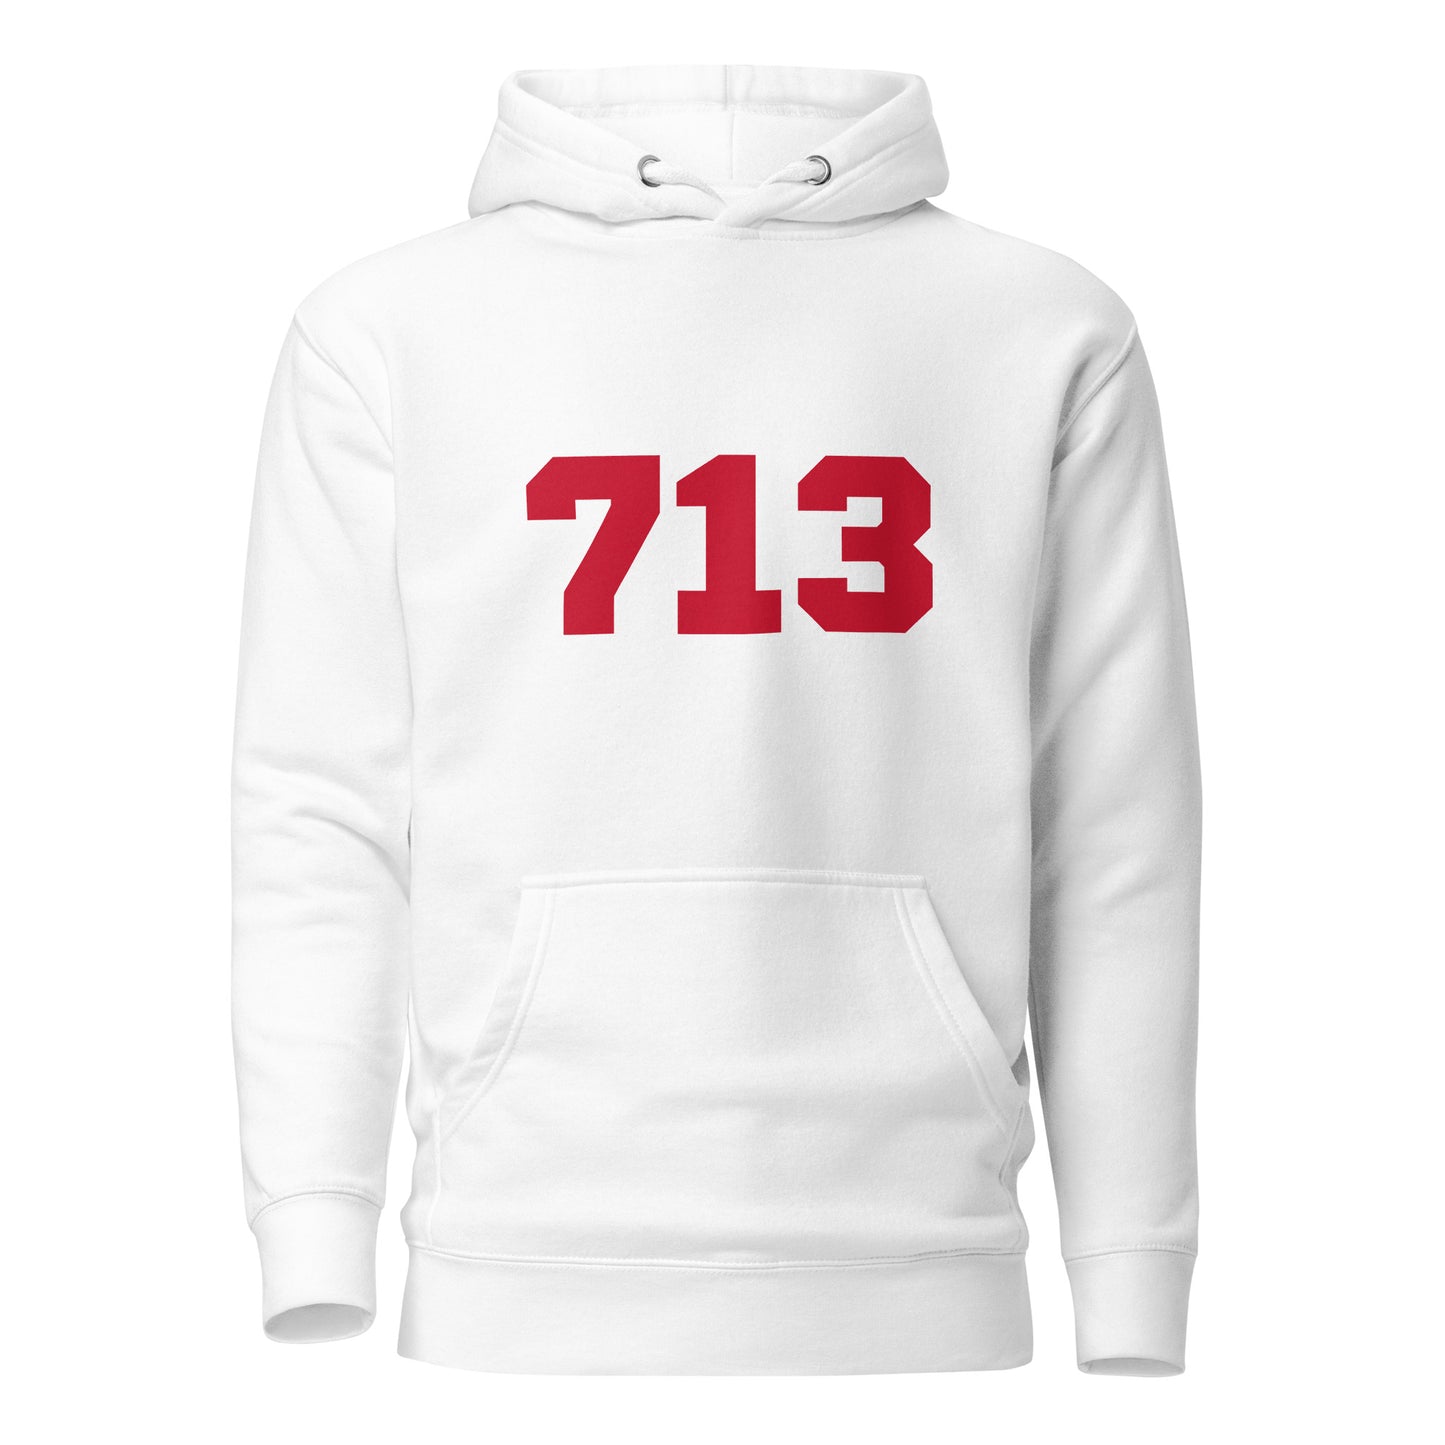 713 Houston Strong Hoodie